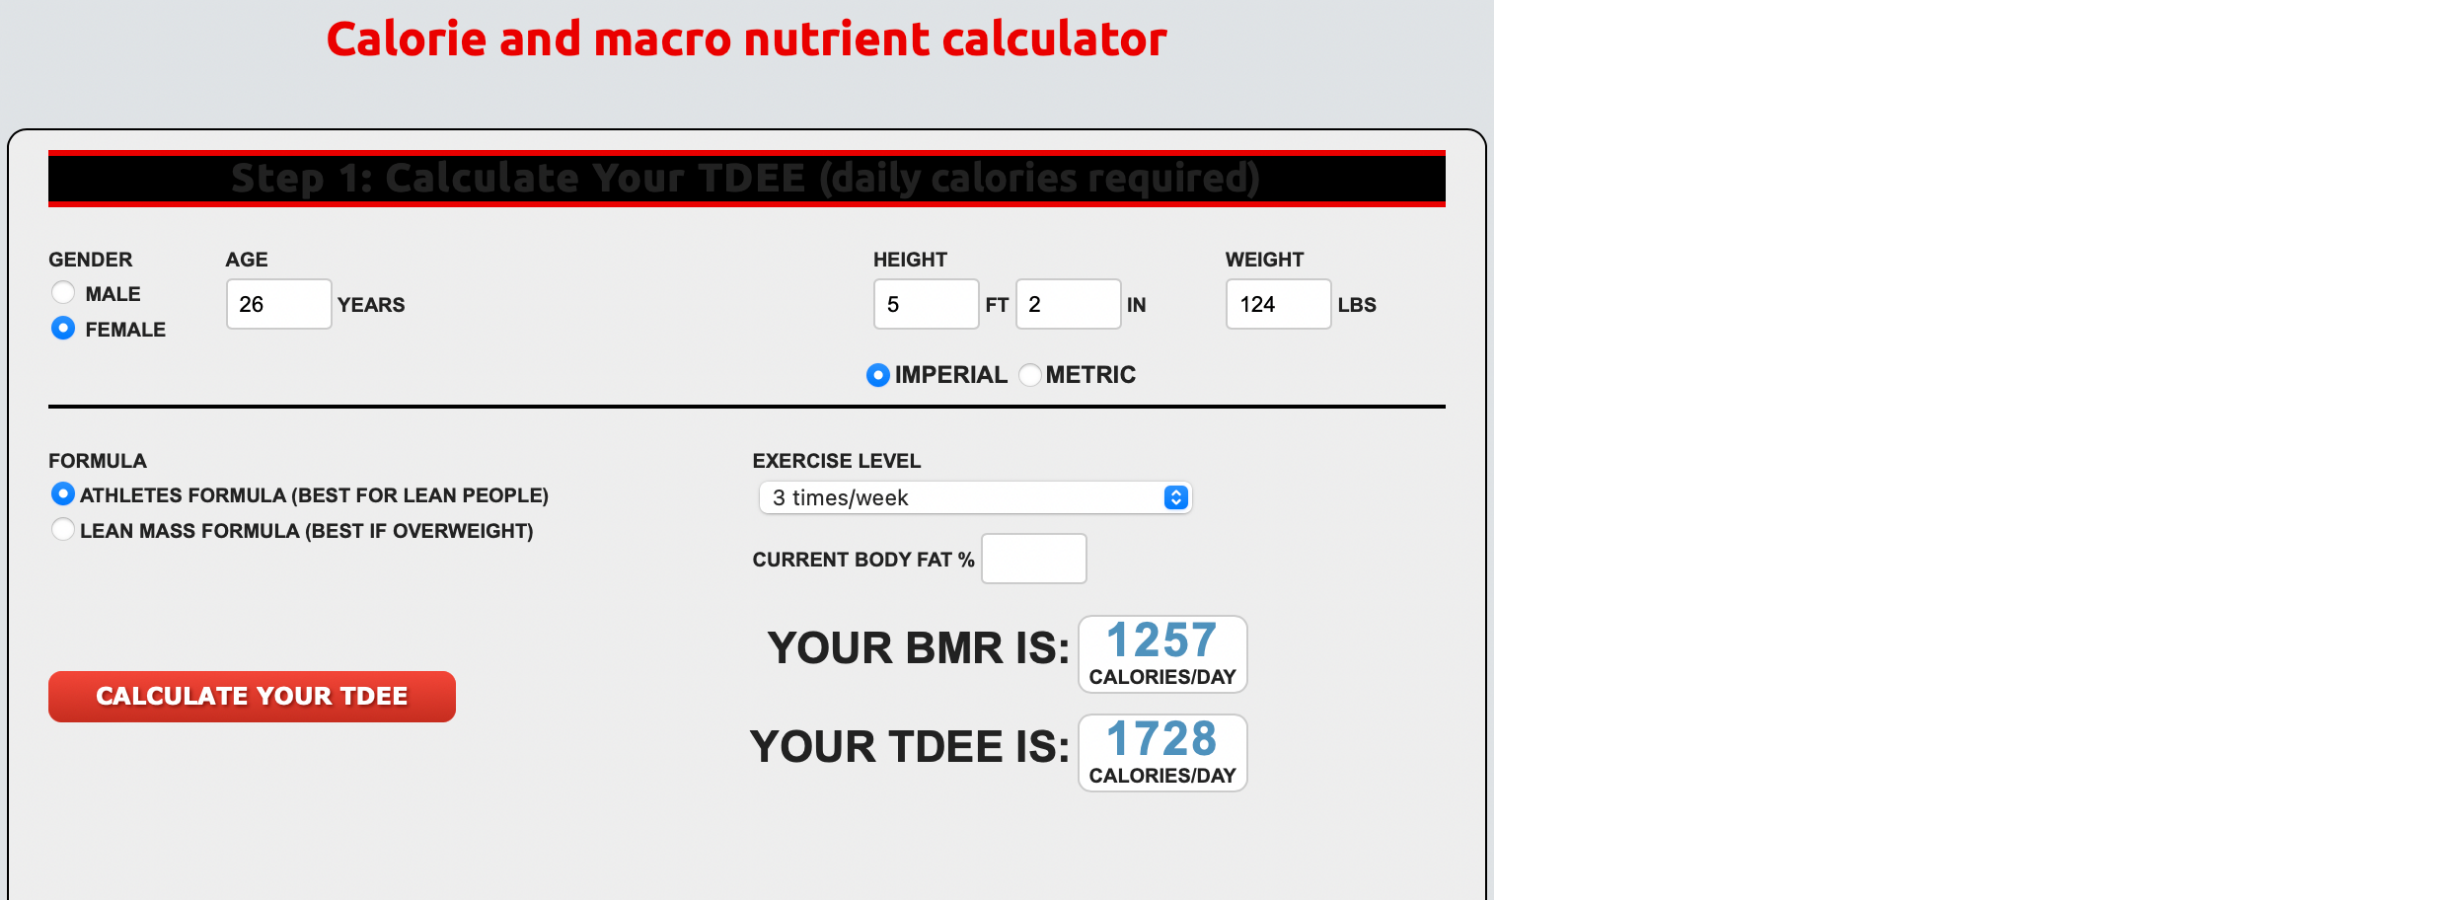 Macros Calculator: Weight loss calculator to lose weight quickly